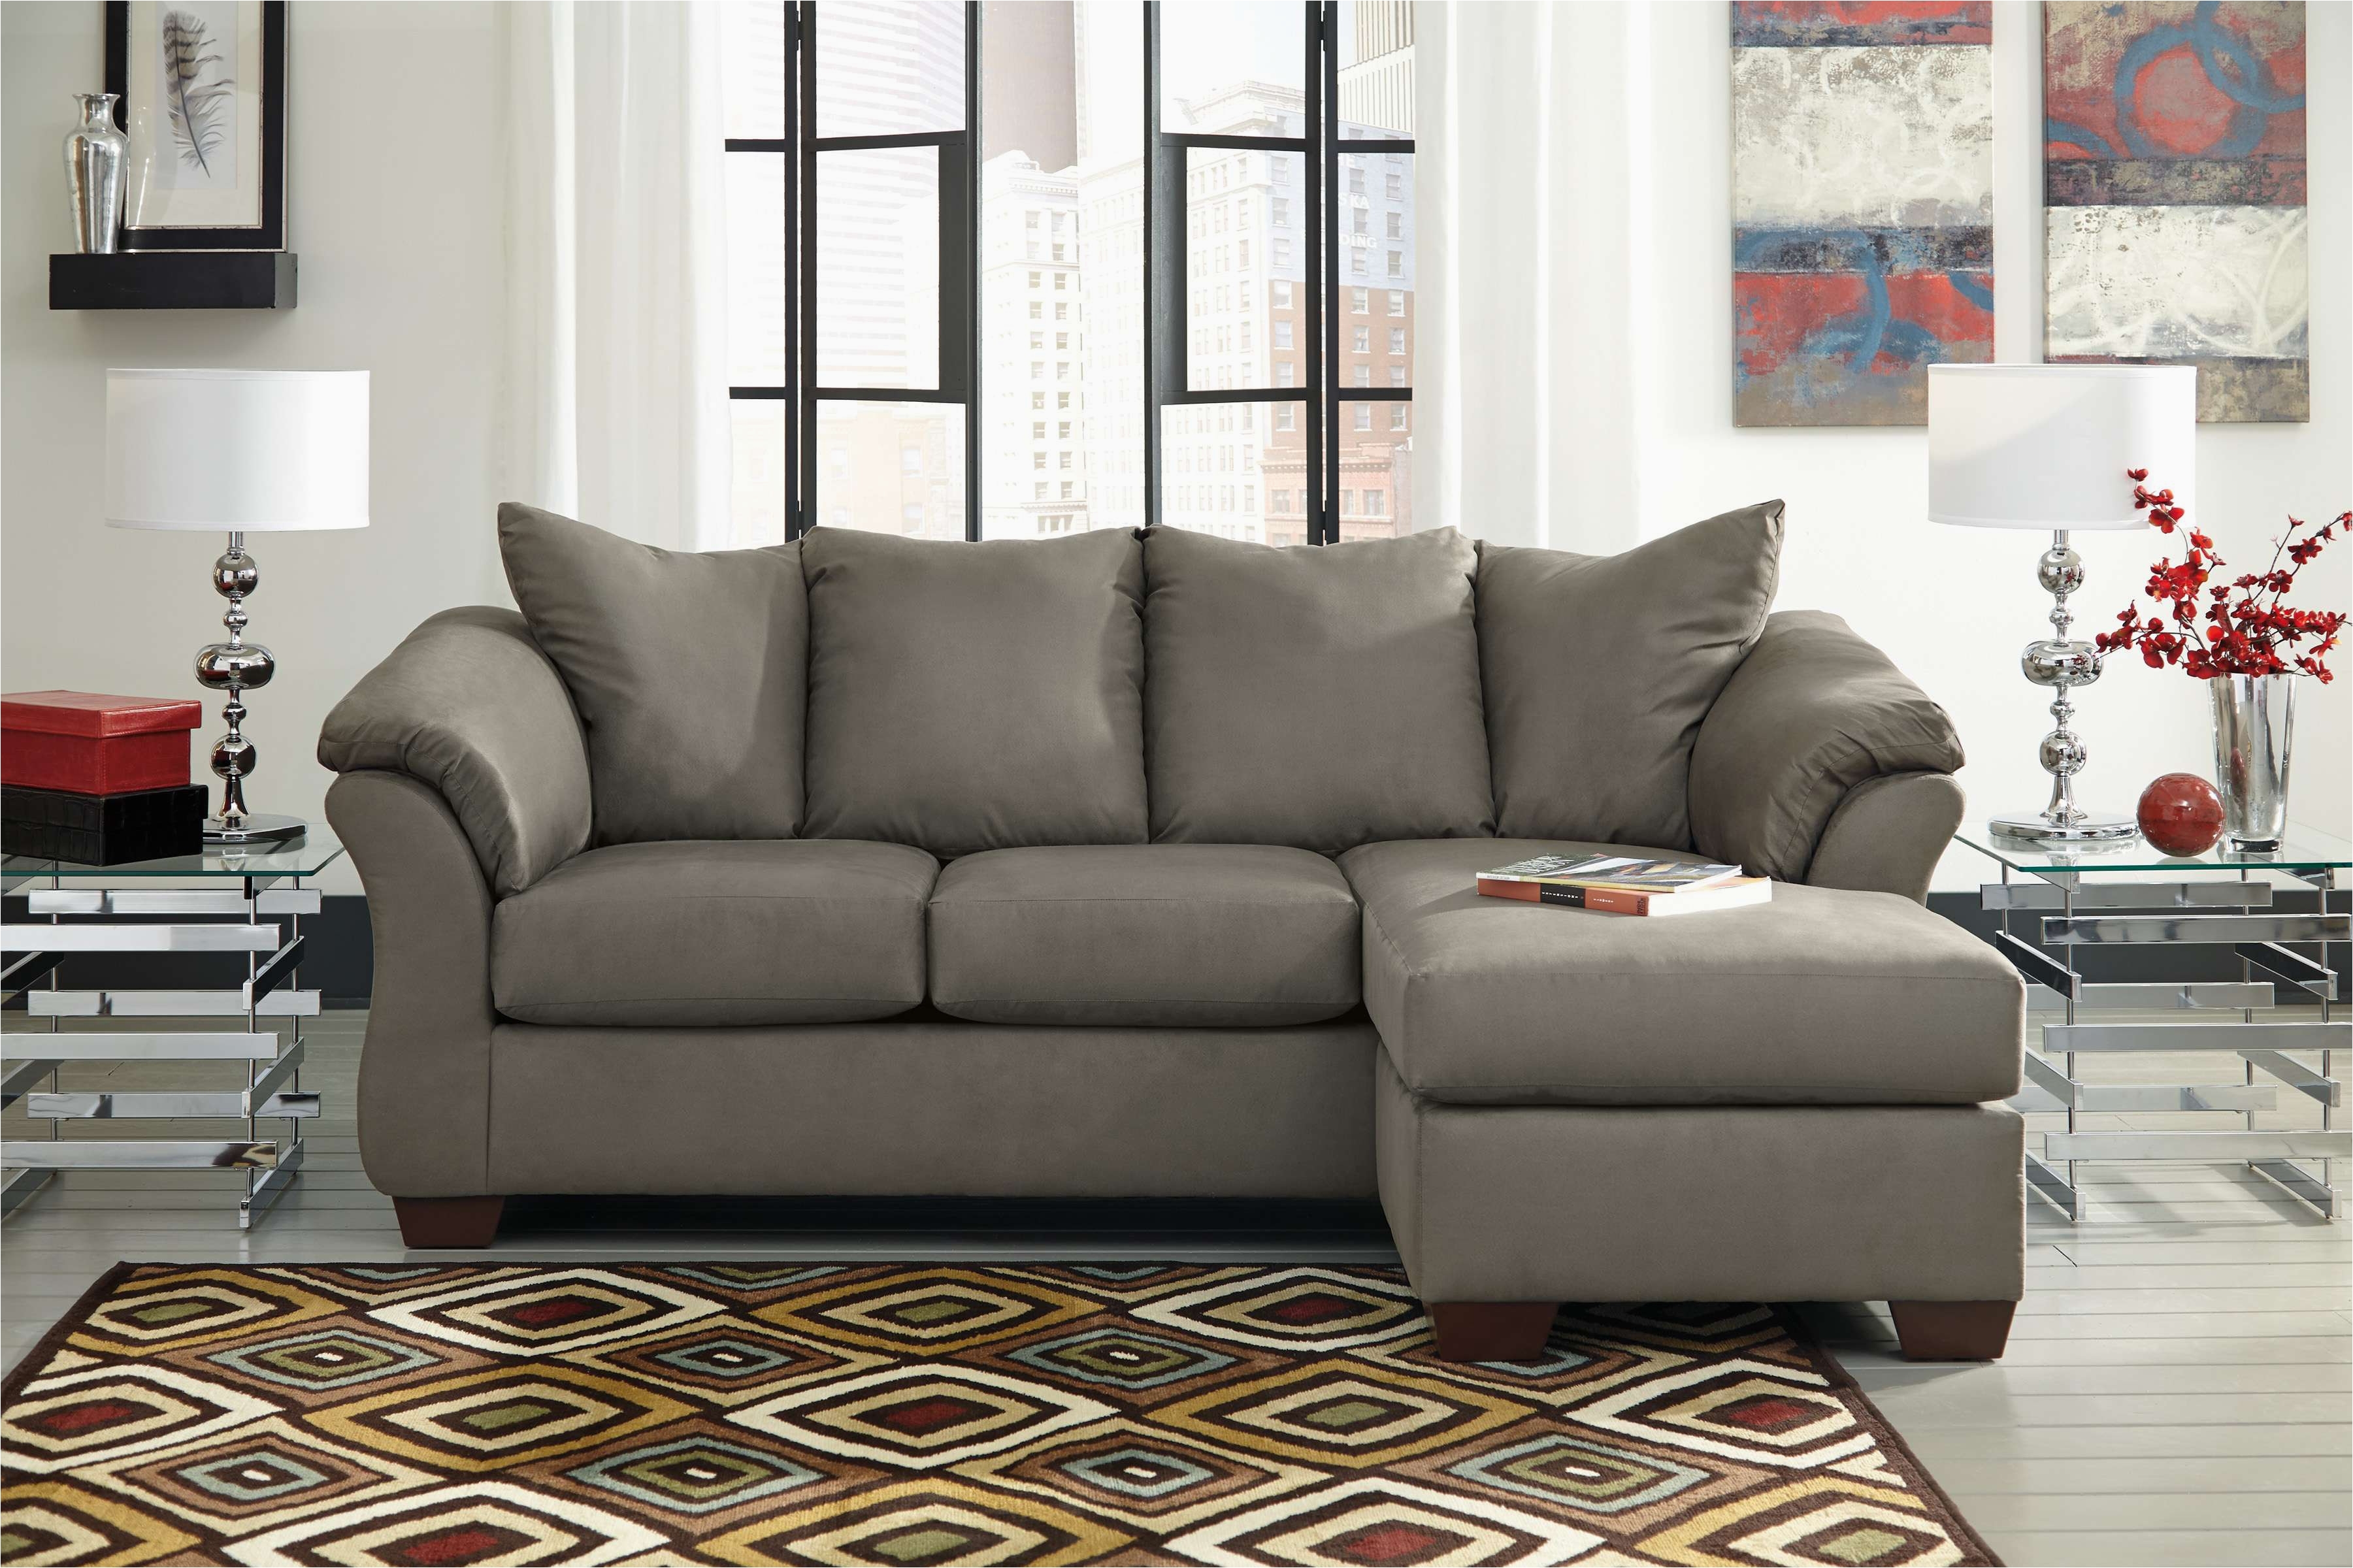 mor furniture for less phoenix az unique 28 ashley furniture sectional with chaise luxurious sofas leather